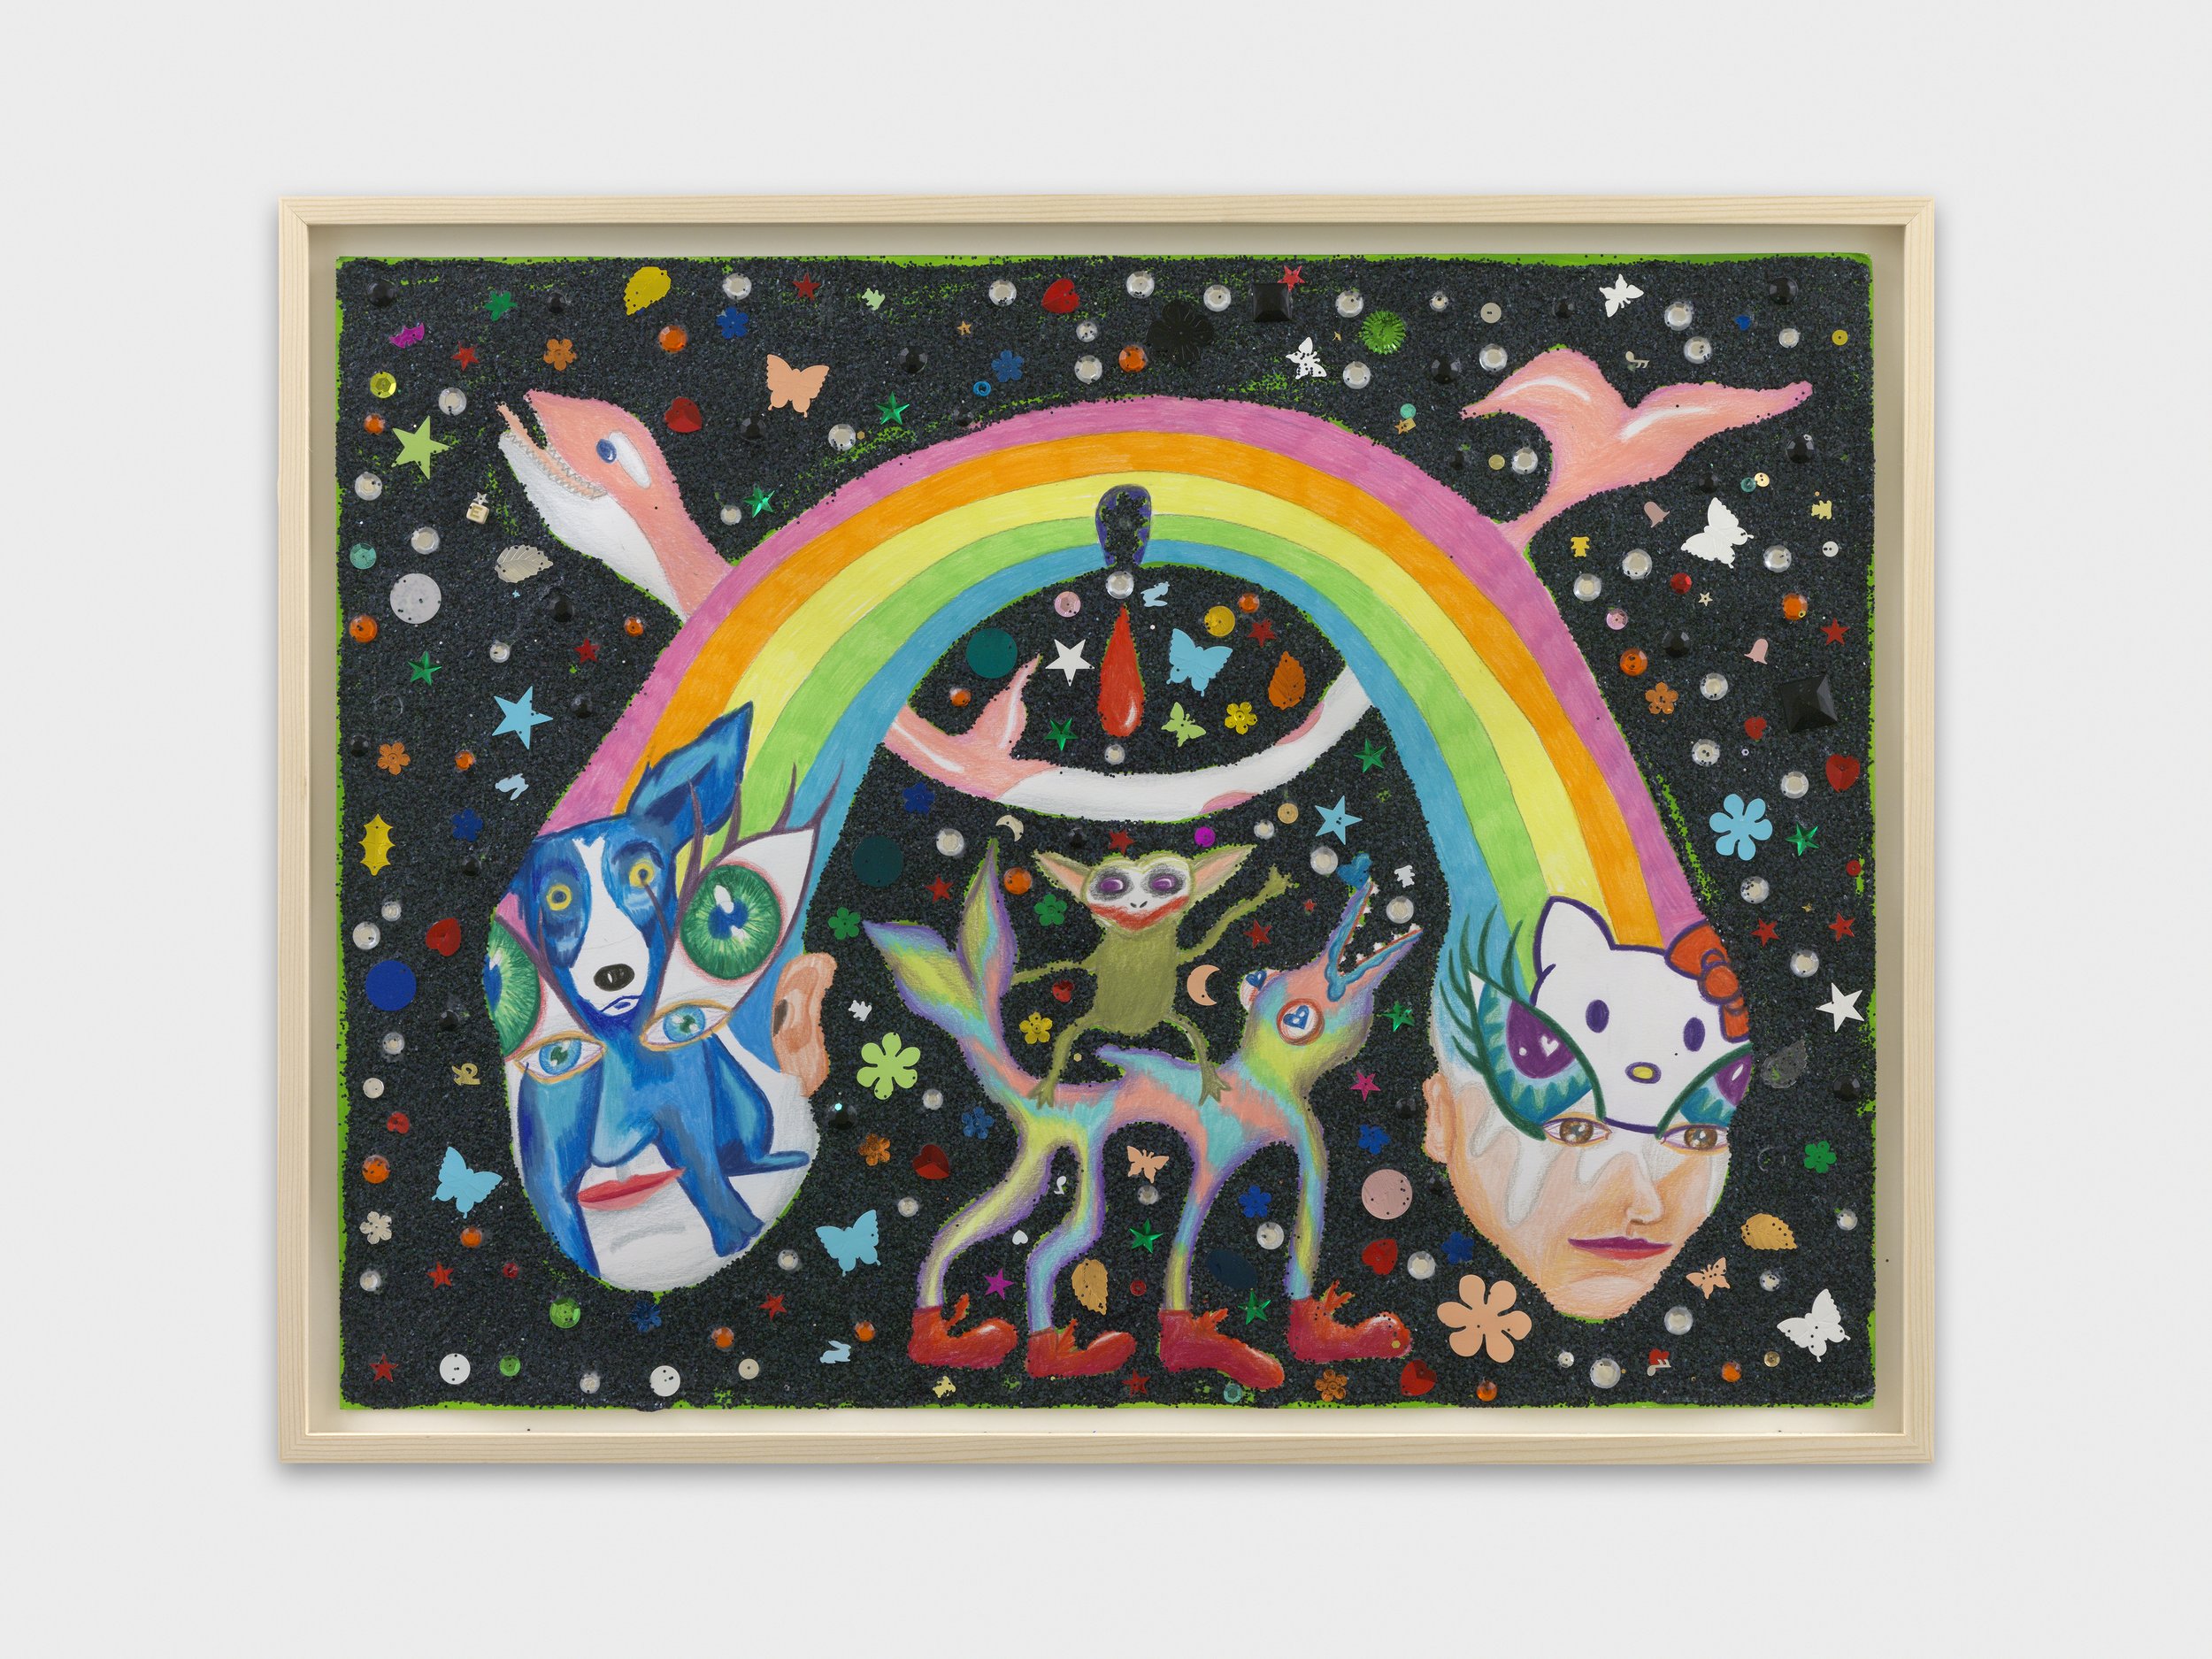   Indigo Children with Cat and Dog Face Paint , 2021  24 x 18 inches (60.96 x 45.72 cm.)  Colored pencil, acrylic paint, Elmer's glue, Modge Podge, sequins, plastic gems, and glitter on paper 